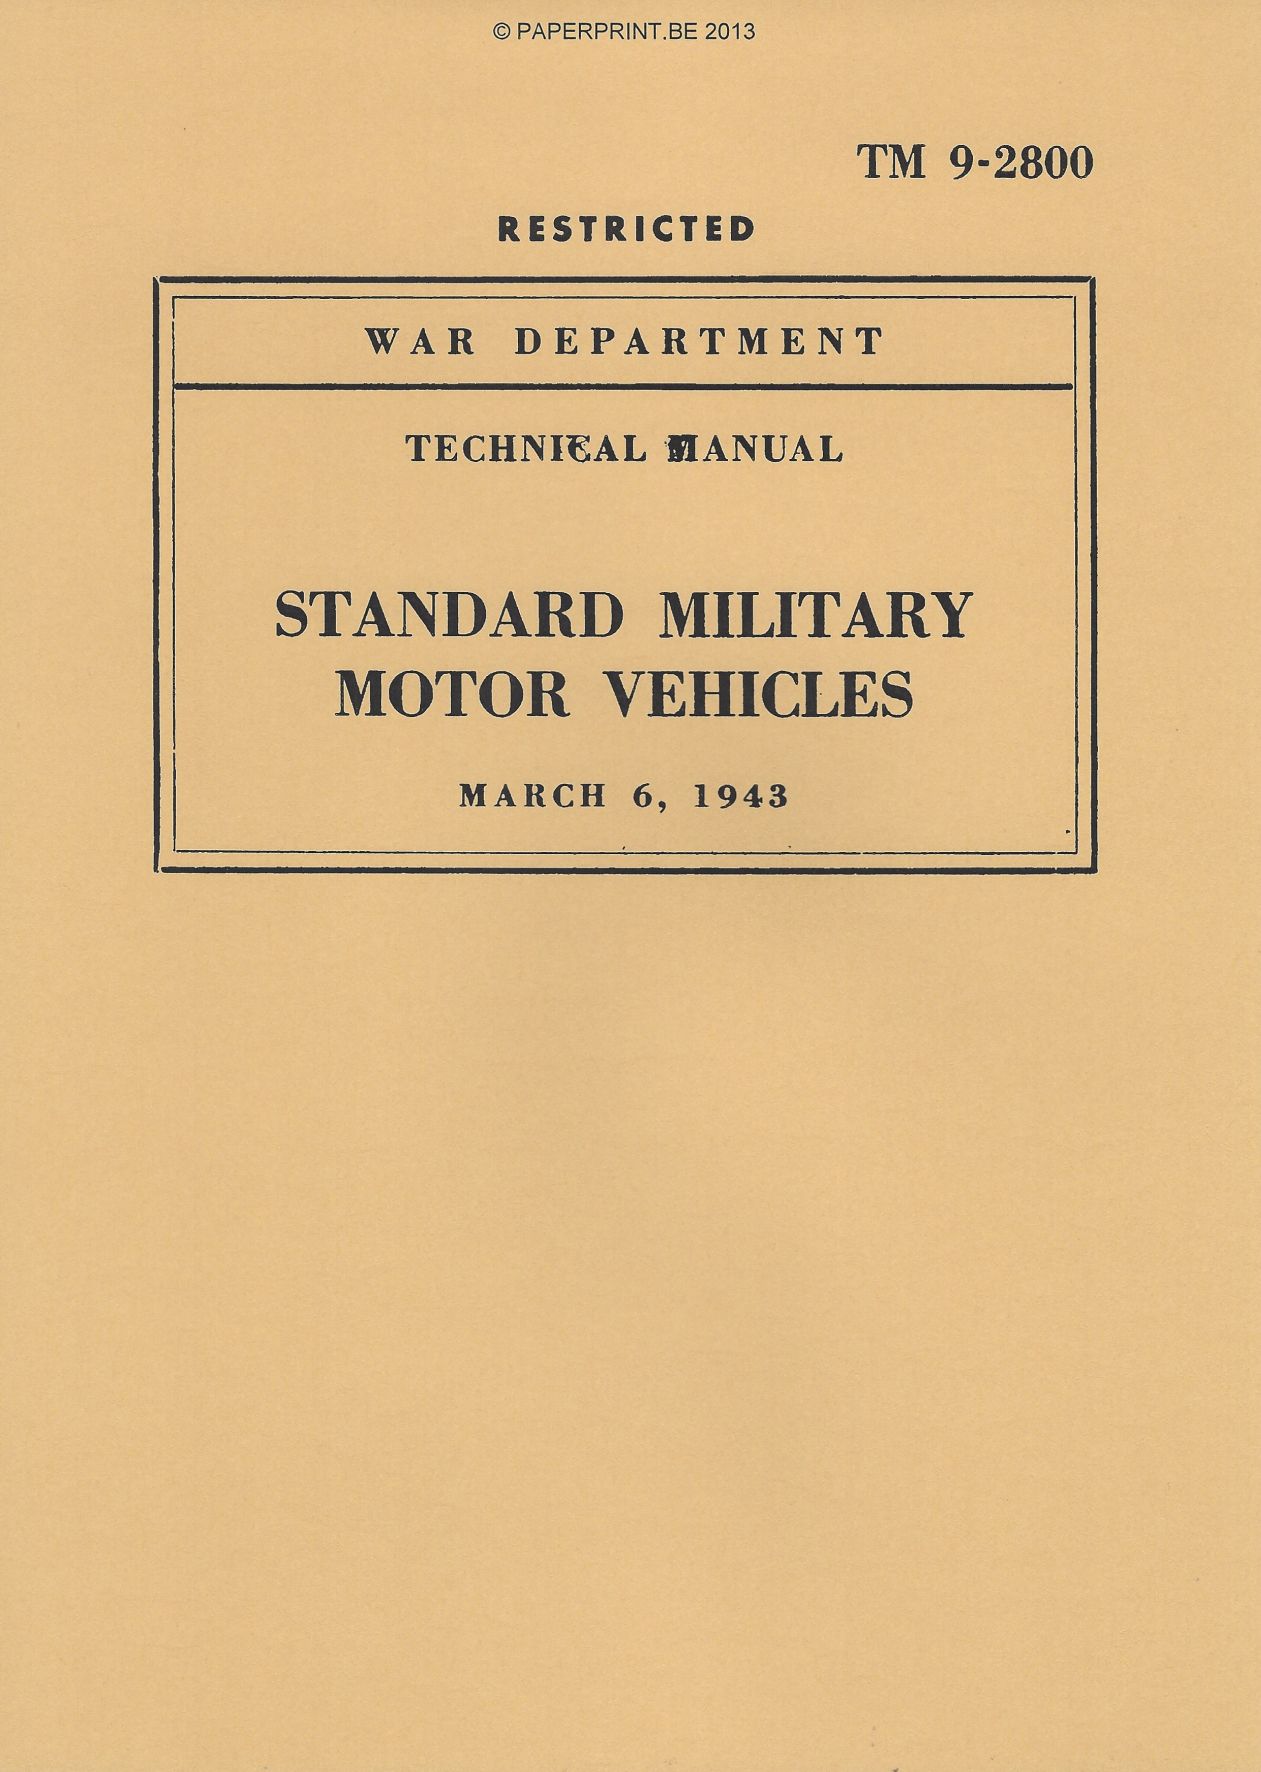 TM 9-2800 EARLY 1943 US STANDARD MILITARY MOTOR VEHICLES